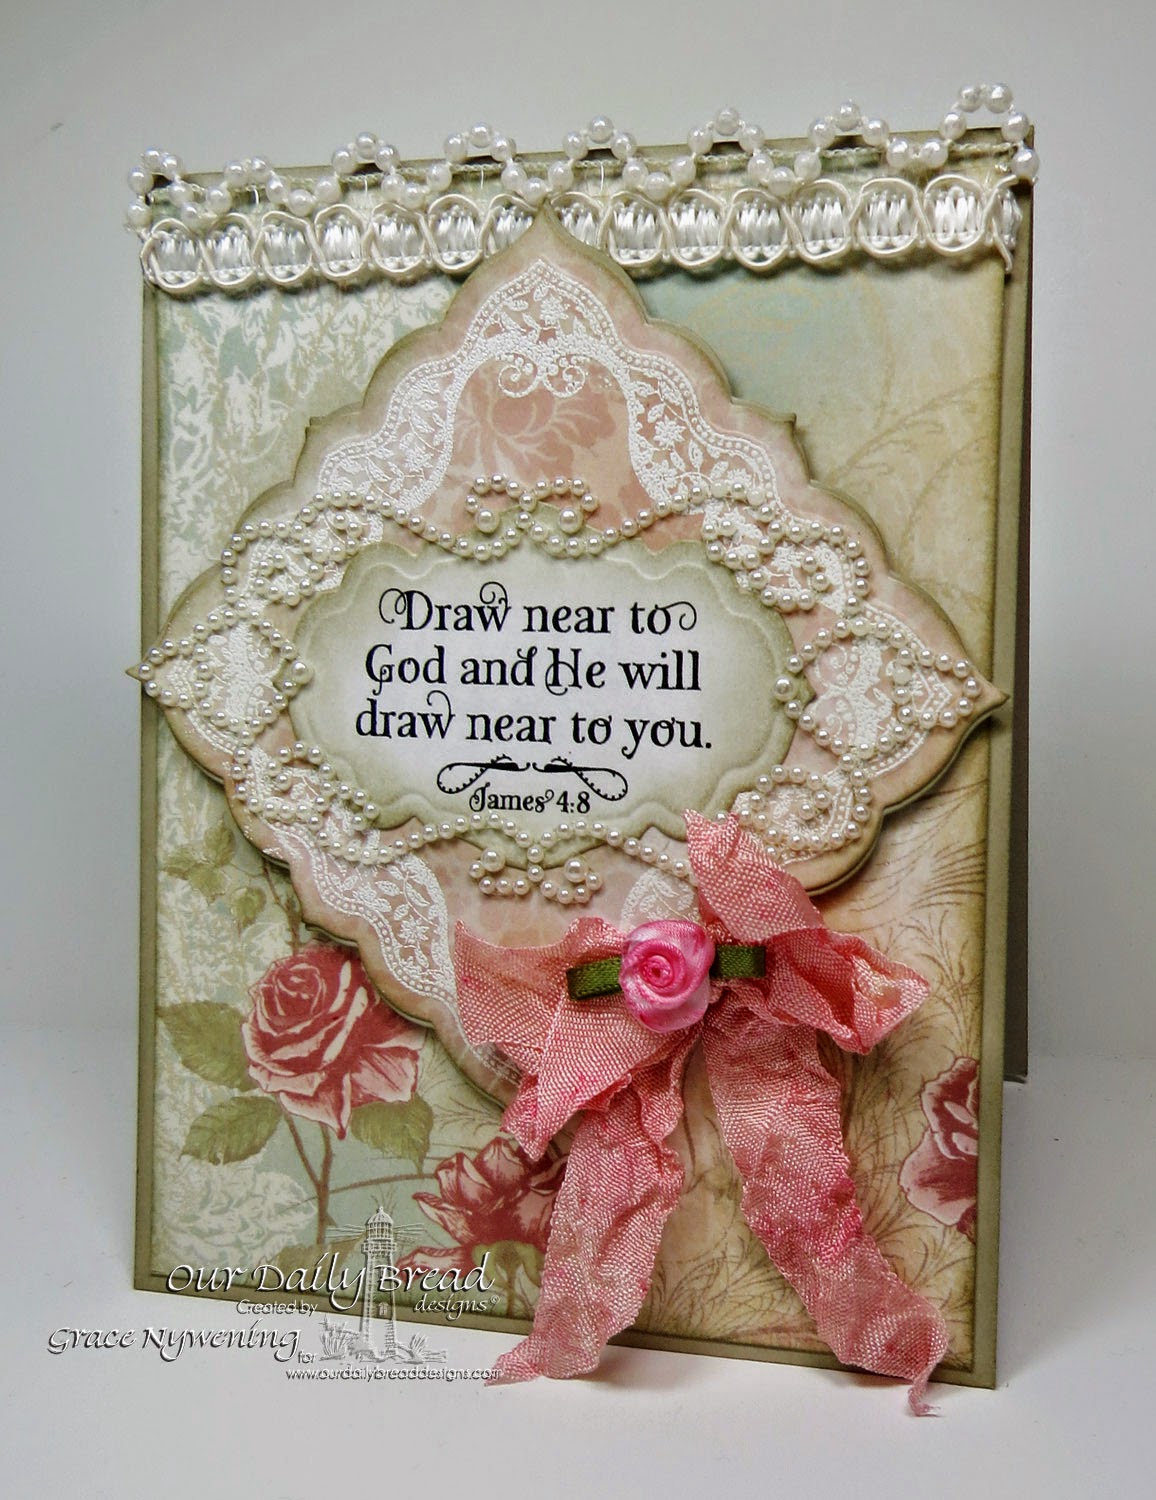 ODBD stamps: God Verses, Romantic Floral Designs, designed by Grace Nywening